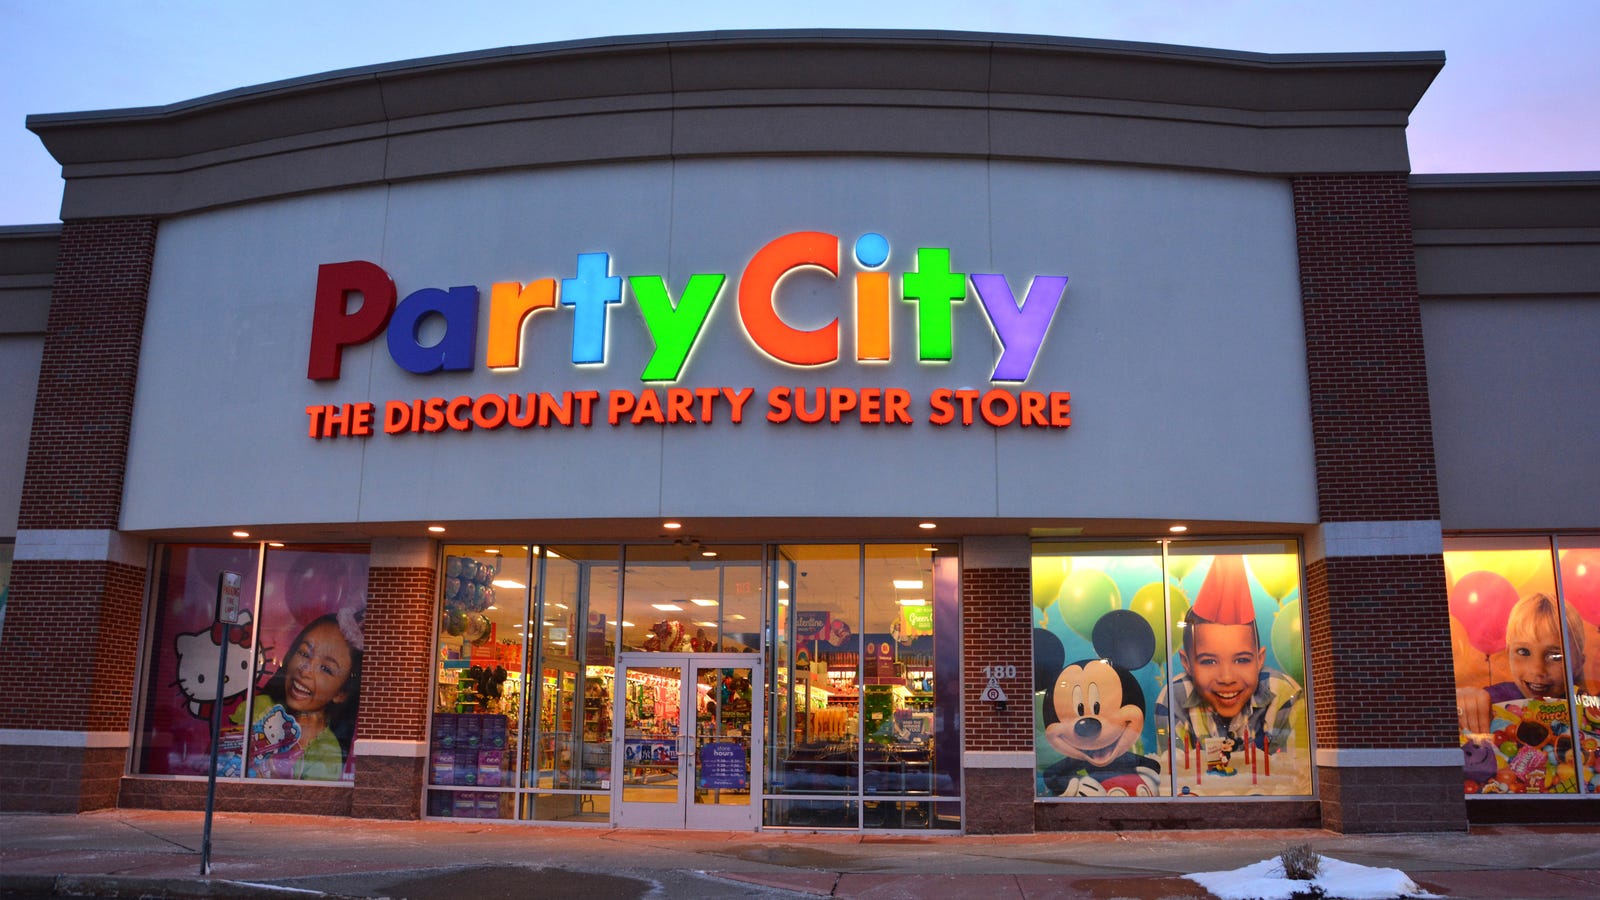 Party City over-apologizes to aggrieved gluten-free victims